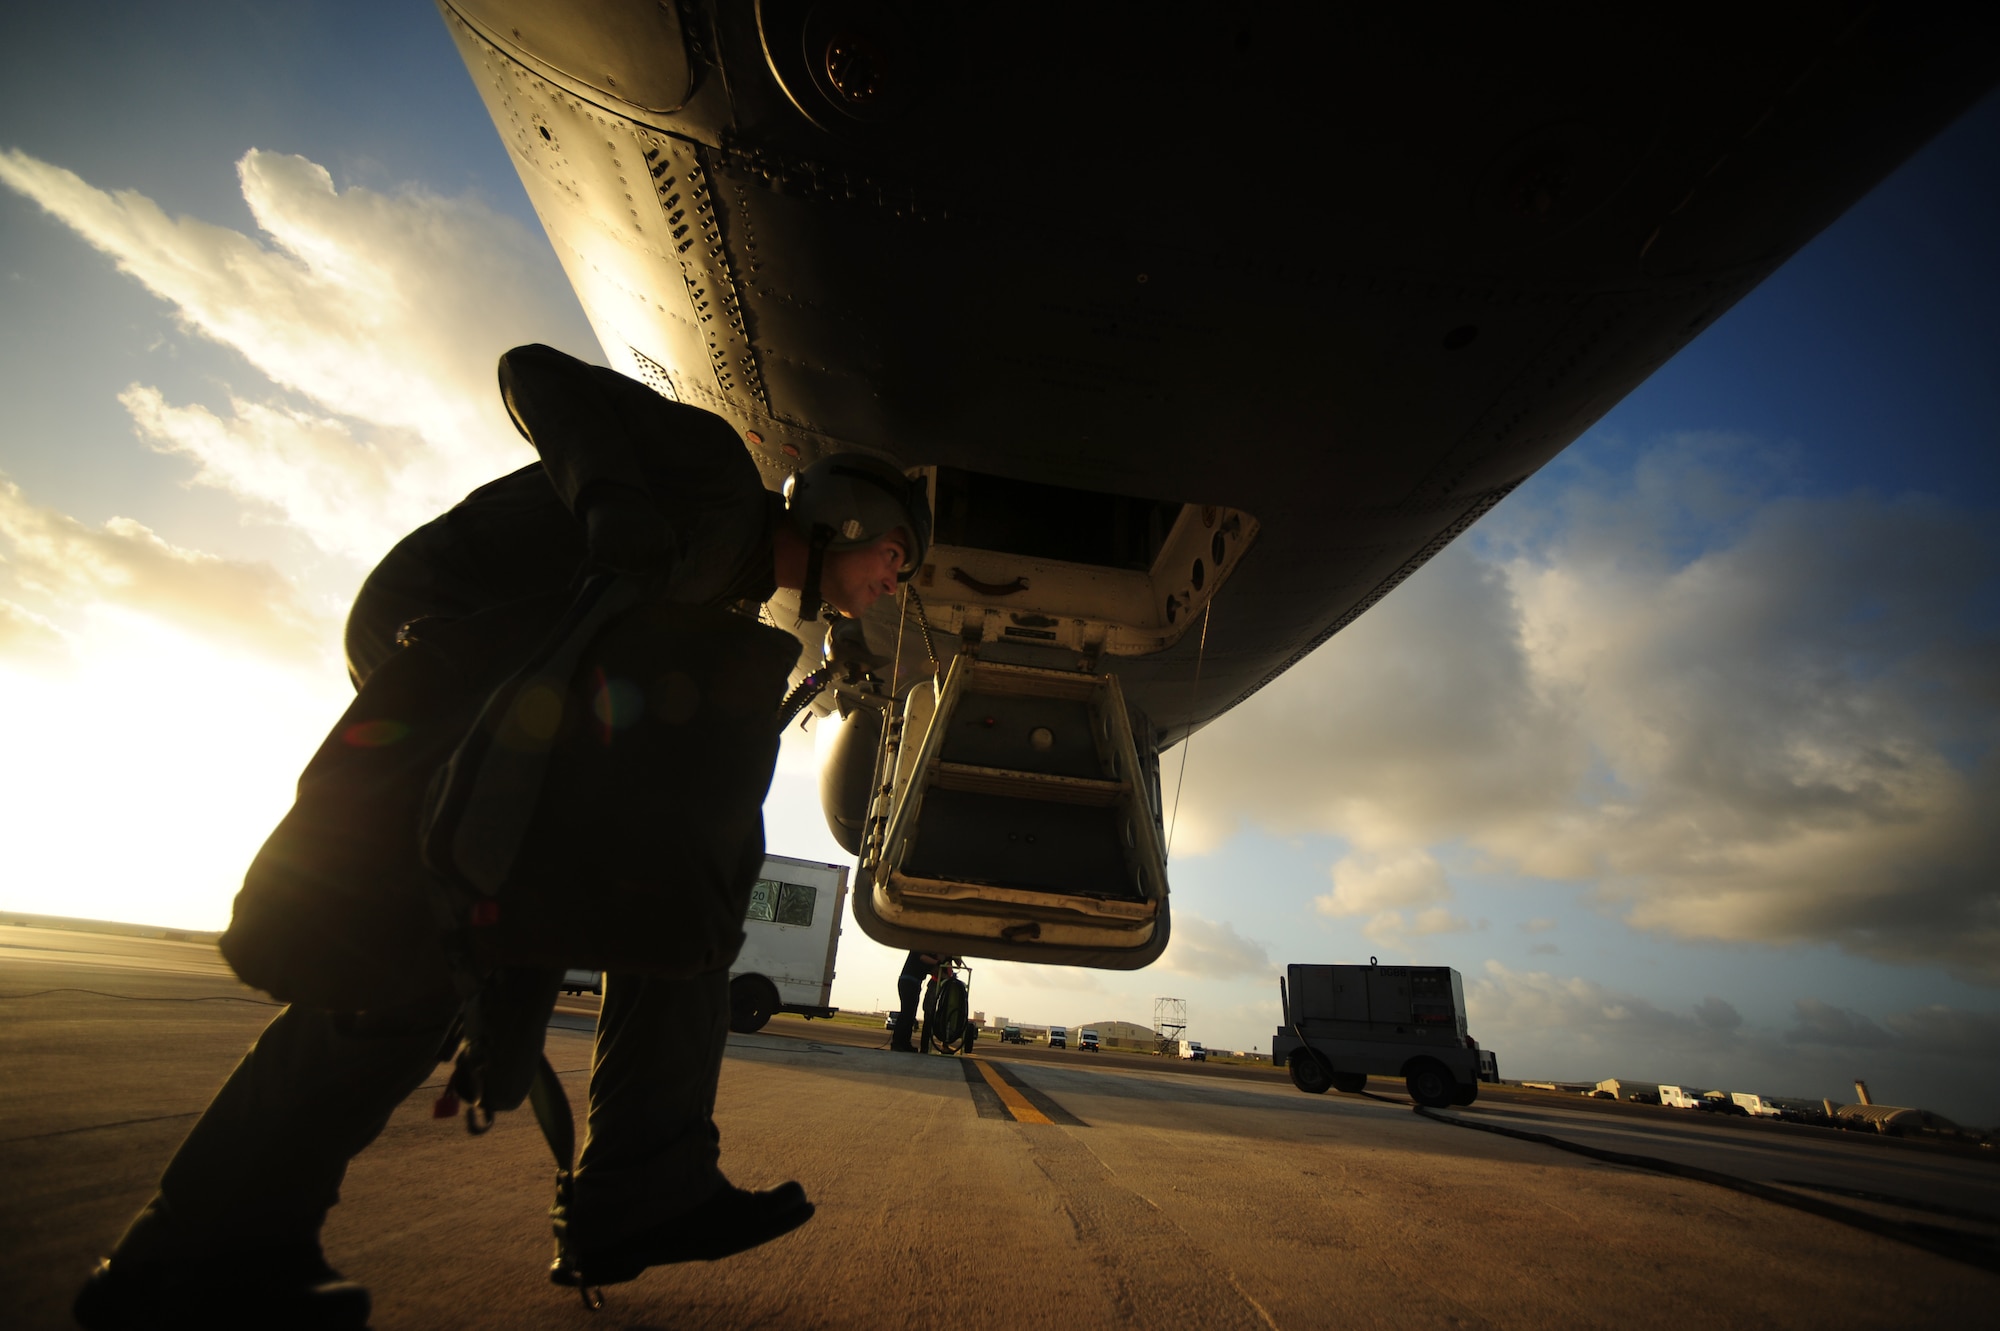 U.S. Air Force Capt. Kerry Baker, a B-52 Stratofortress navigator assigned to the 20th Expeditionary Bomb Squadron, Barksdale Air Force Base, La., prepares to step aboard a B-52 aircraft before a mission in support of Exercise Cope North at Andersen AFB, Guam, Feb. 9, 2010. The United States Air Force and the Japanese Air Self-Defense Force conduct Cope North annually to increase combat readiness and interoperability, concentrating on coordination and evaluation of air tactics, techniques and procedures.  The ability for both nations to work together increases their preparedness to support real-world contingencies.  (U.S. Air Force photo by Staff Sgt. Jacob N. Bailey)